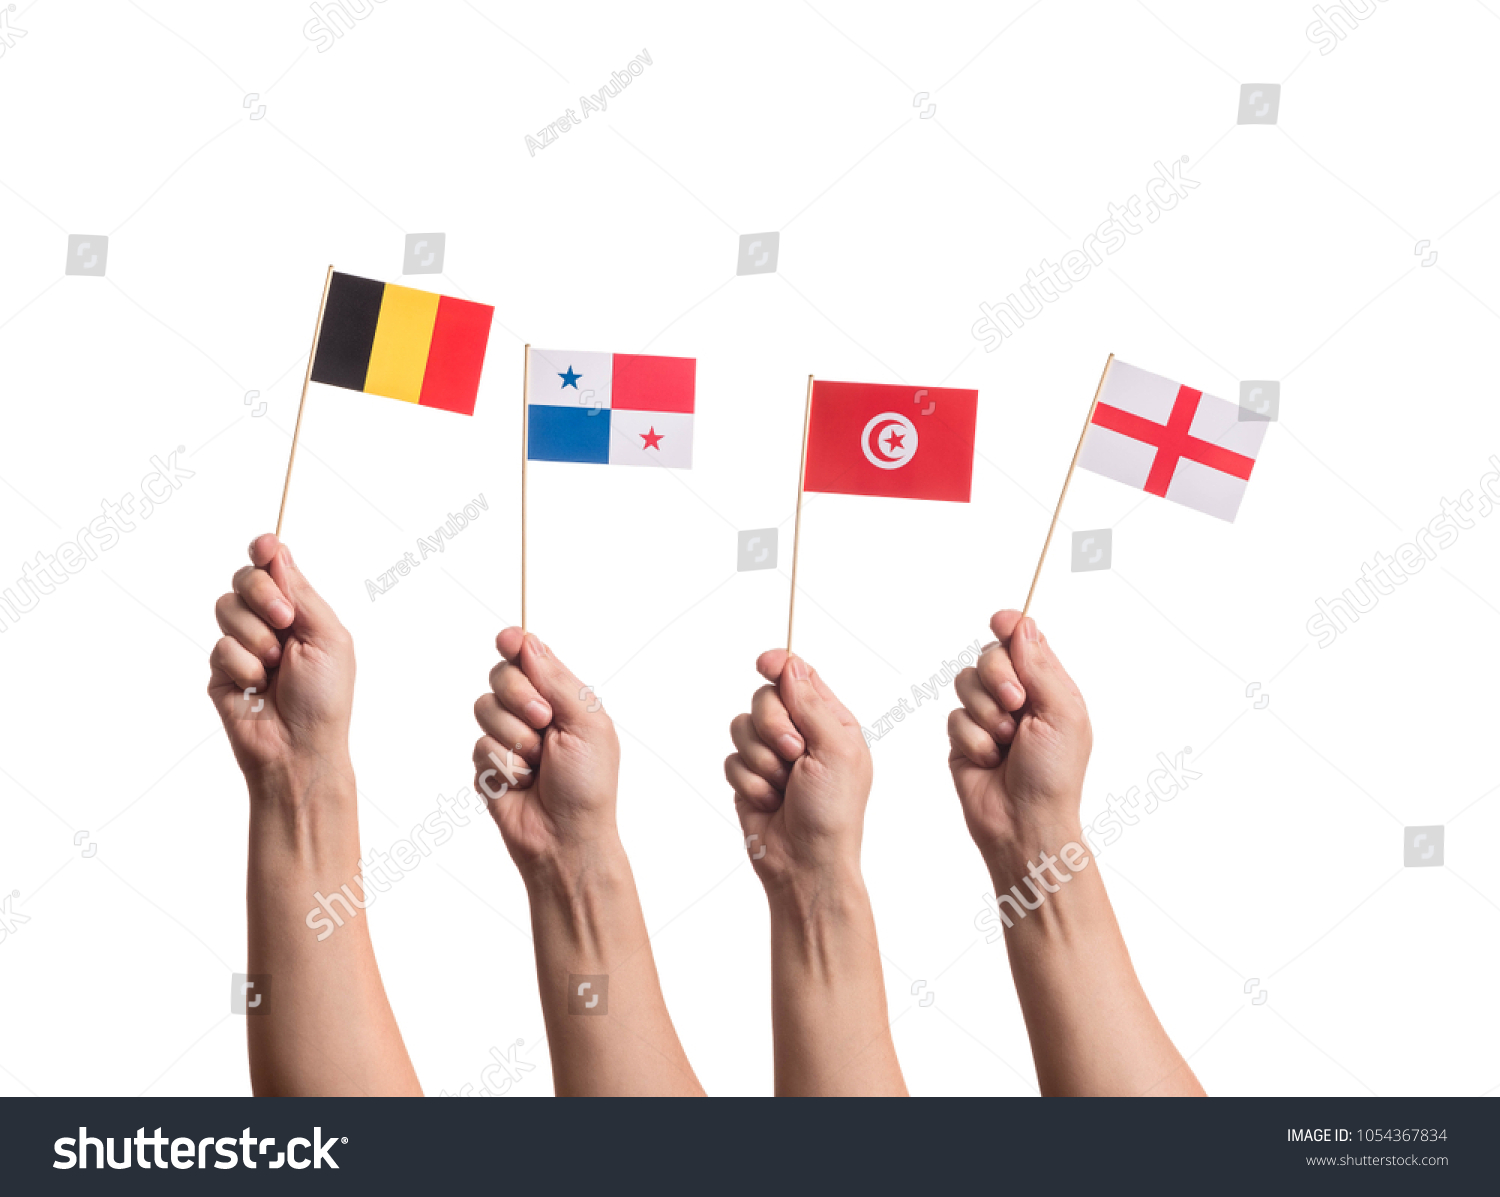 Little paper national flags in hands isolated on white background. Flags of national football teams of Belgium, Panama, Tunisia, England. World cup competitors in group G #1054367834